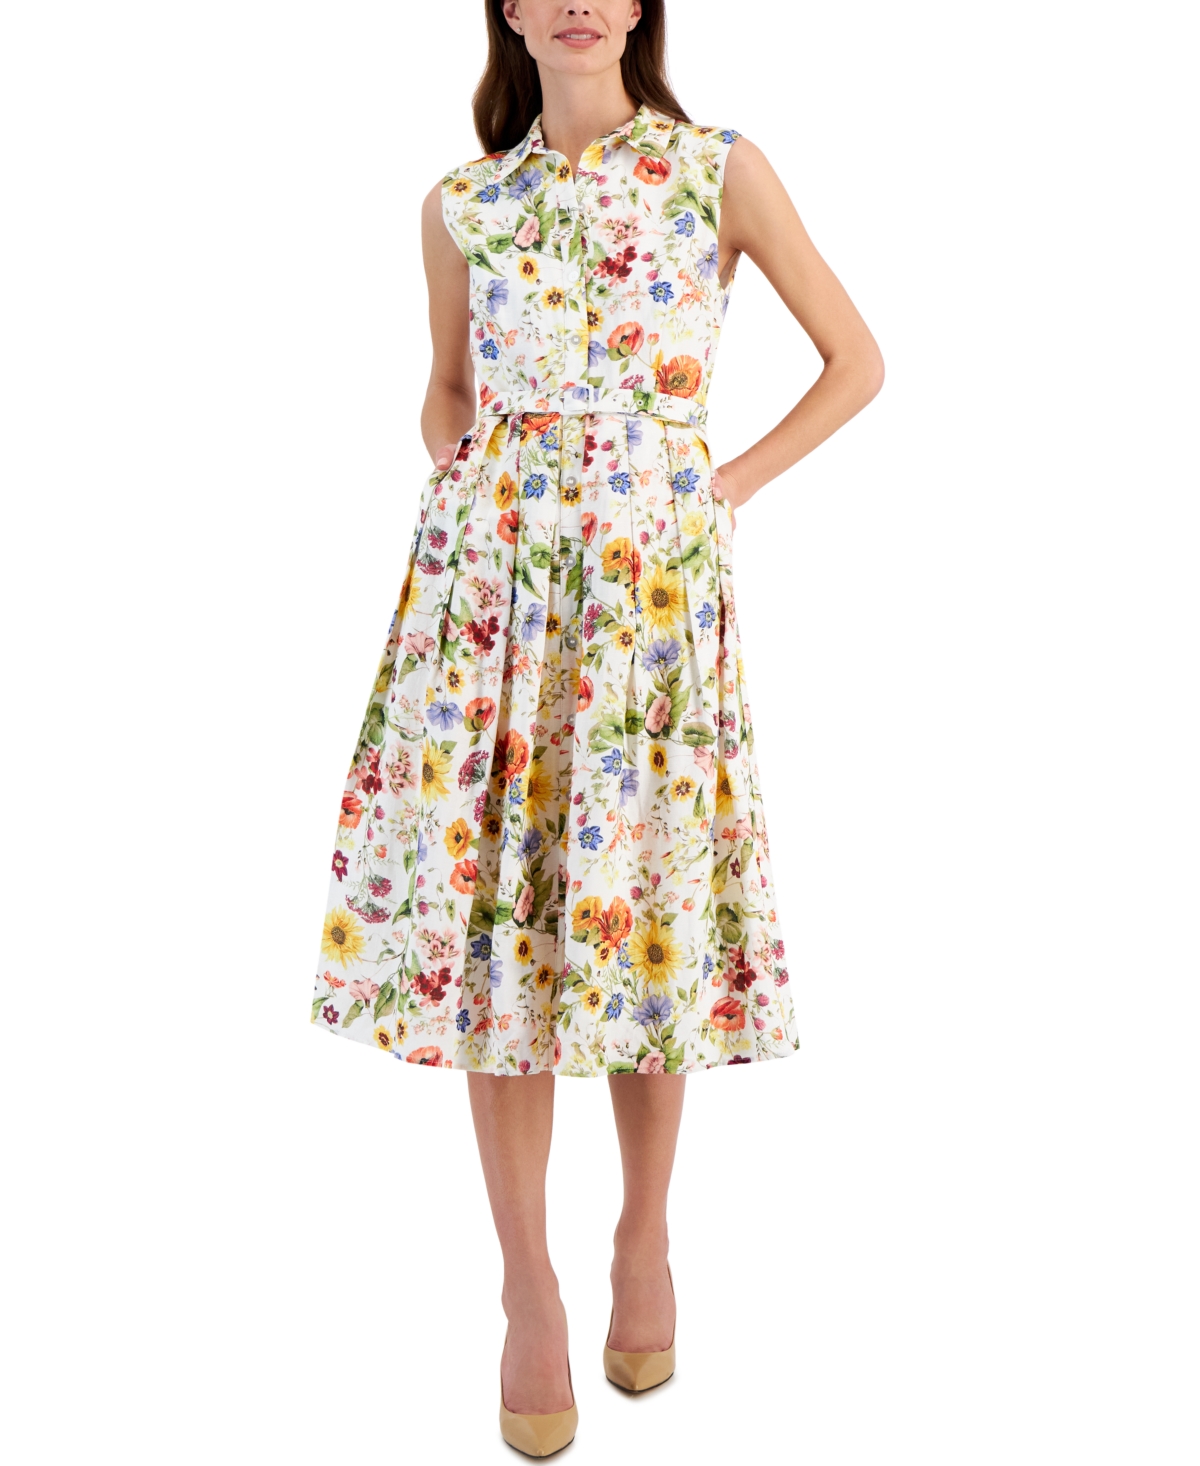 Women's Floral Printed Linen-Blend Belted Fit & Flare Midi Dress - Sunray Garden Yellow